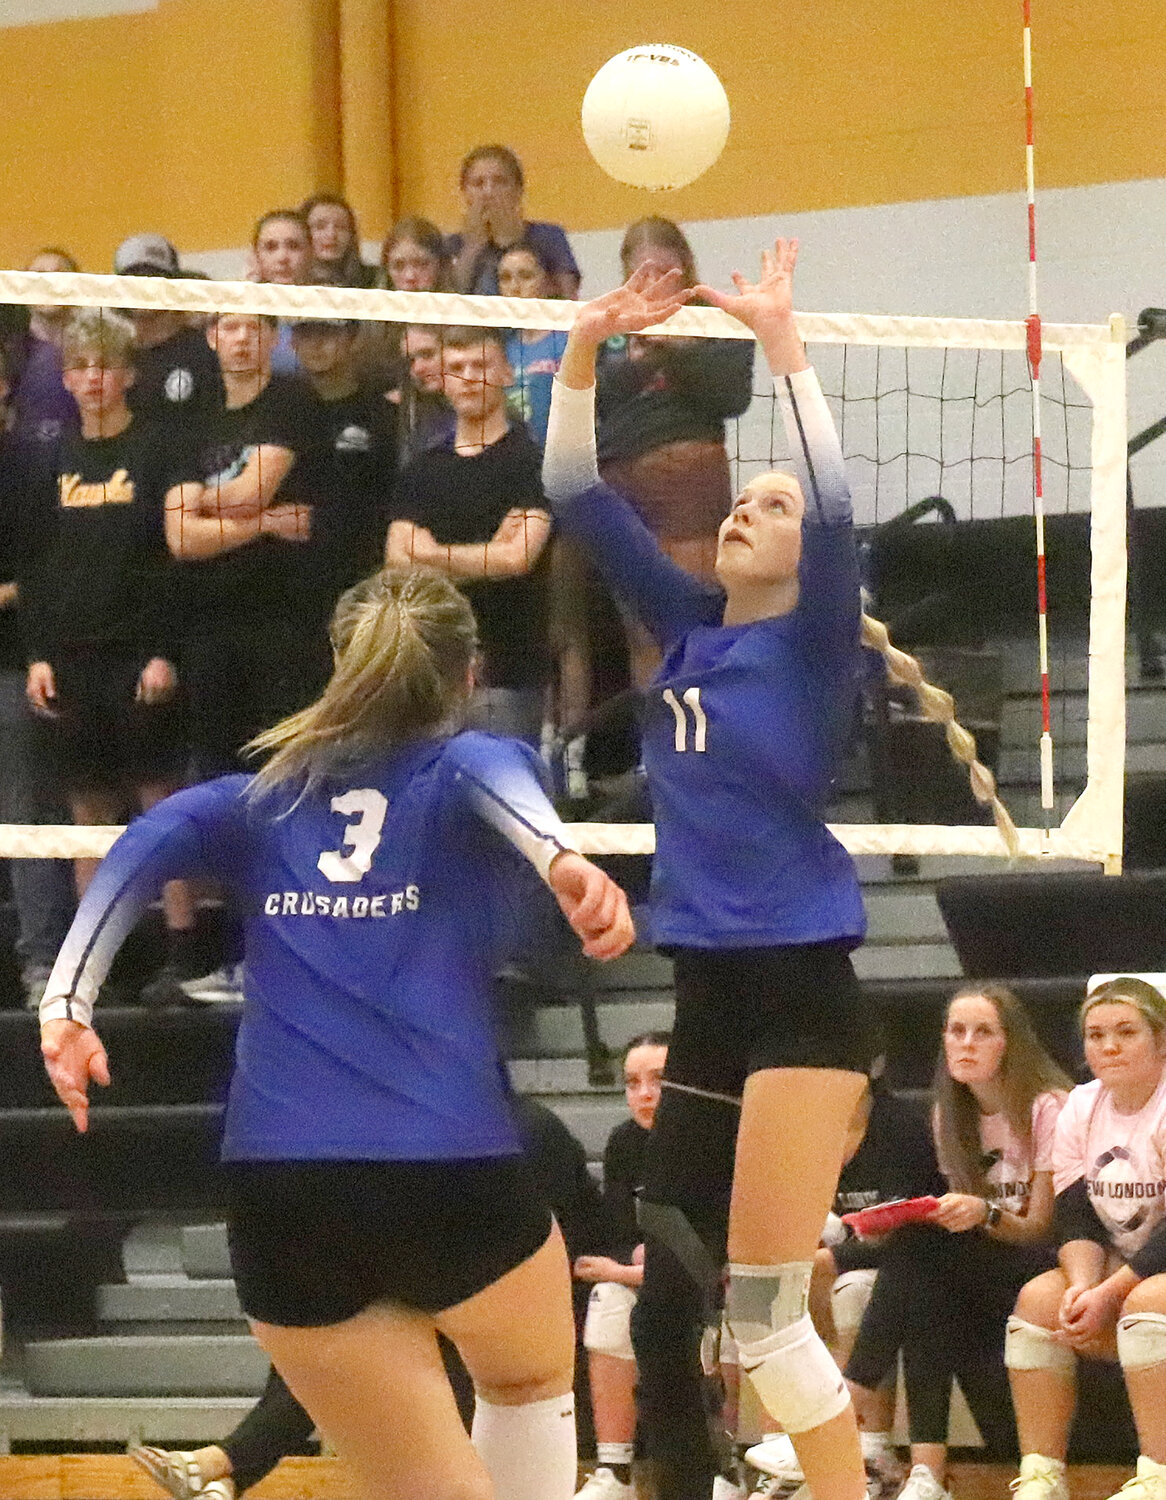 Senior Natalie Randolph gets a set going as freshman Adalyn Kruse rushes the net in third set action Tuesday in New London.